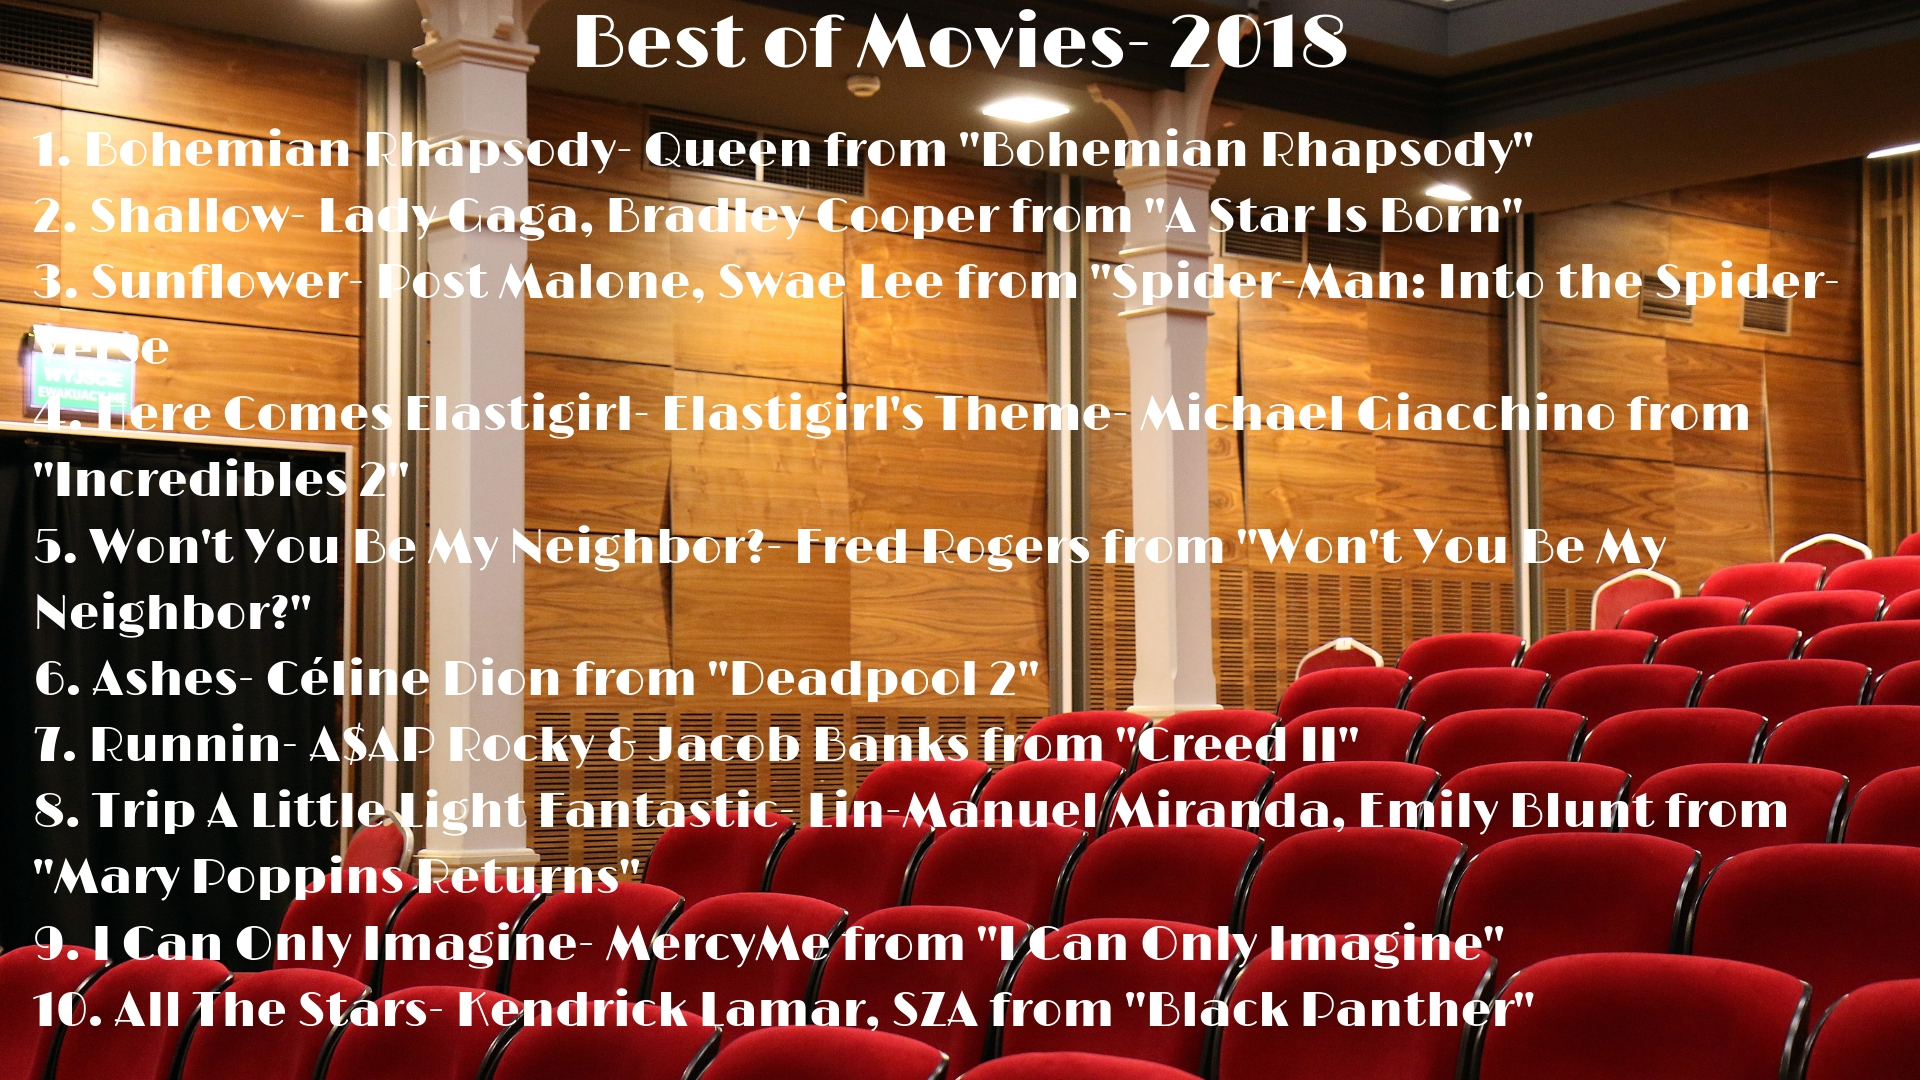 Best of Movies- 2018